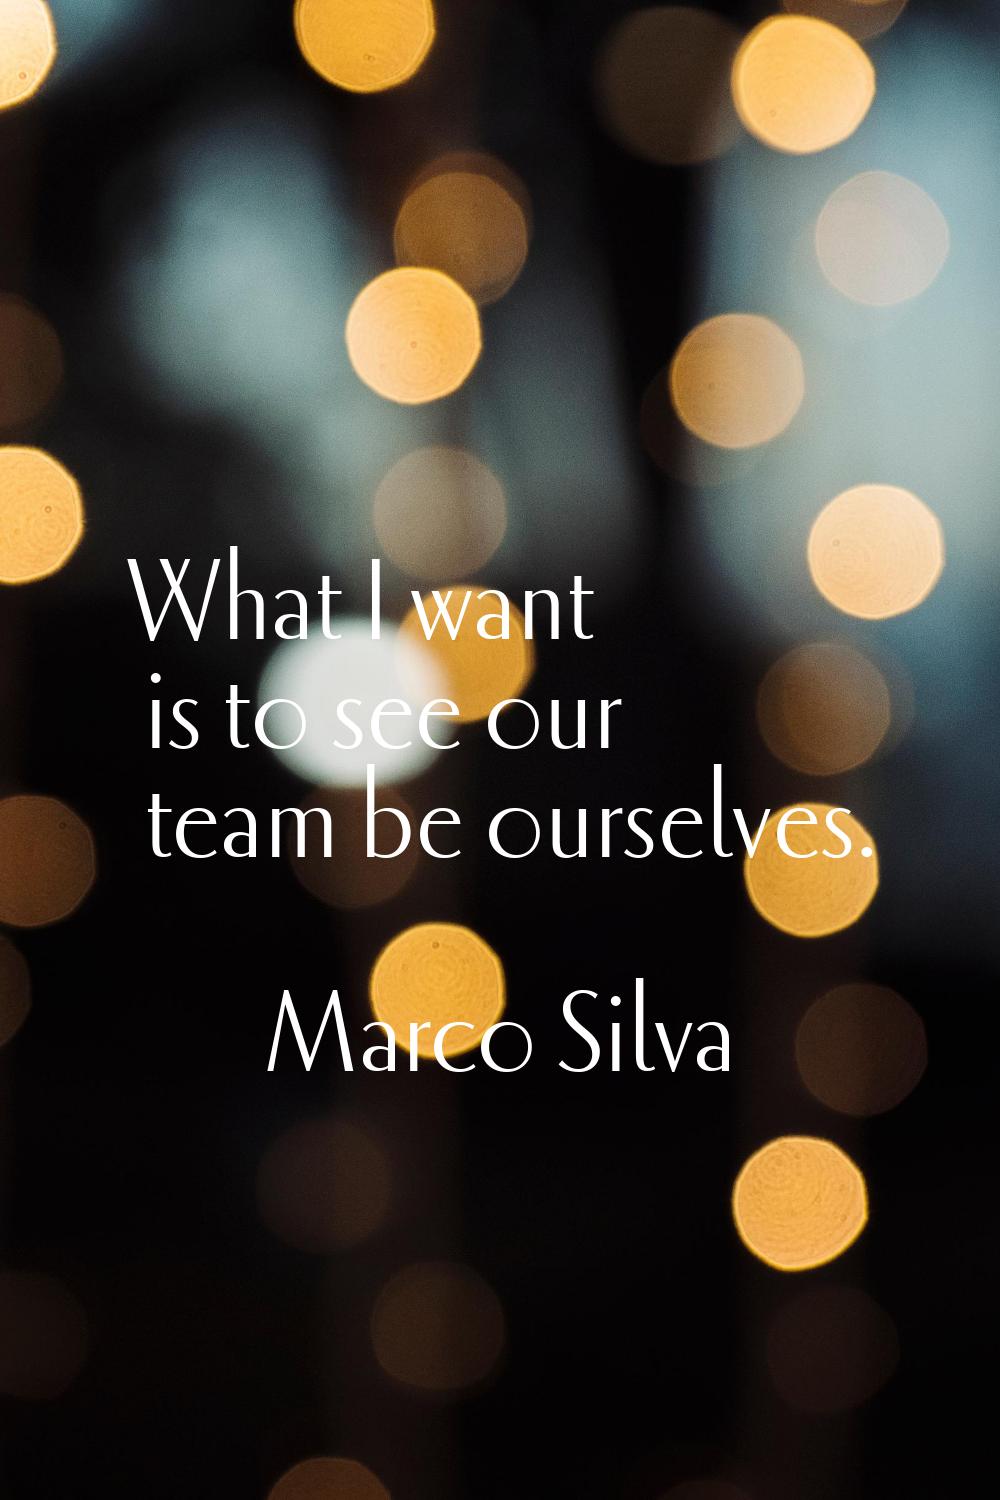 What I want is to see our team be ourselves.